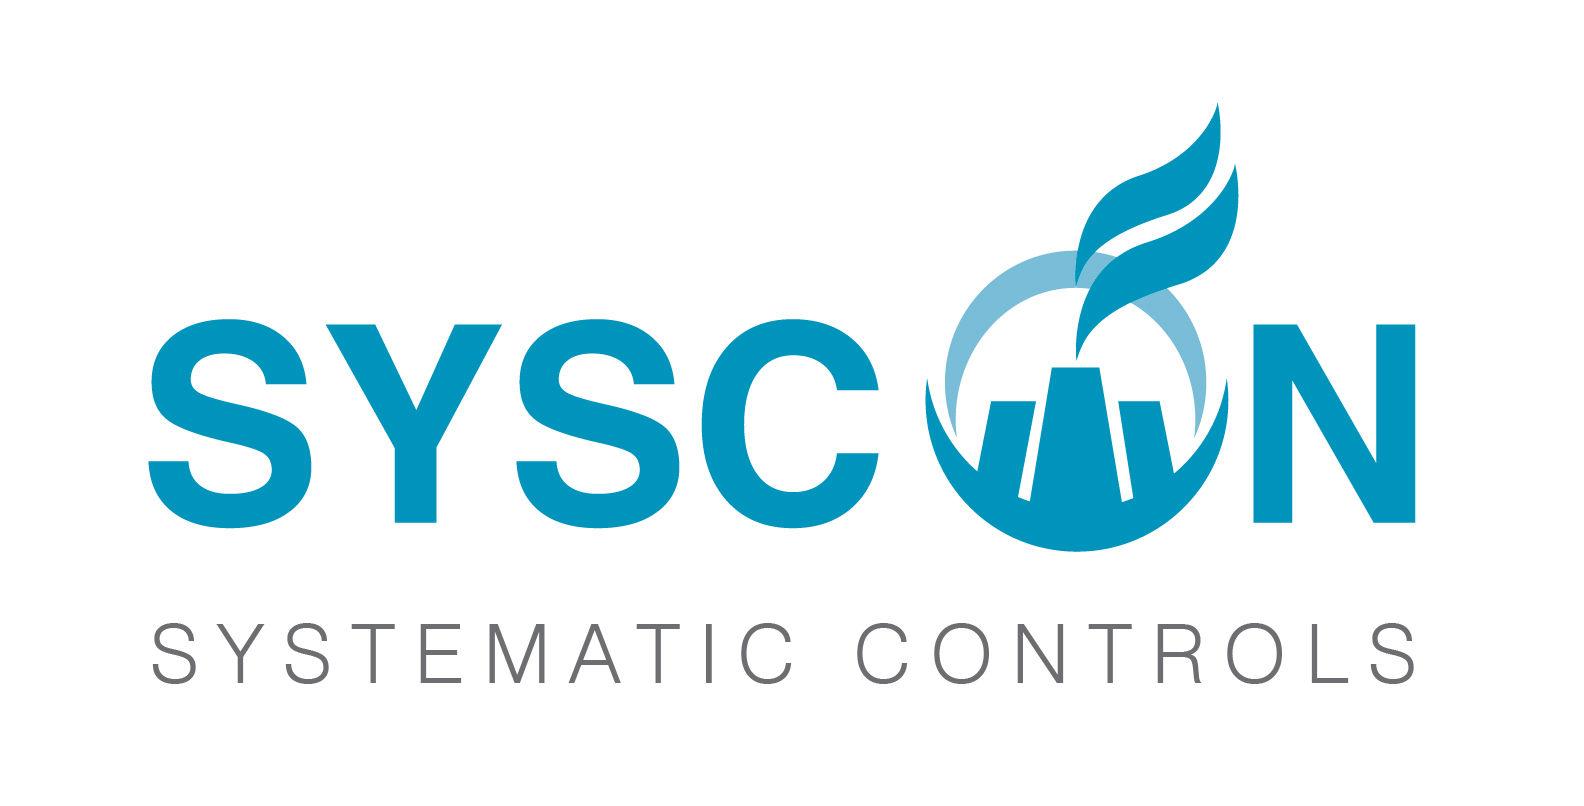 SYSTEMATIC CONTROLS